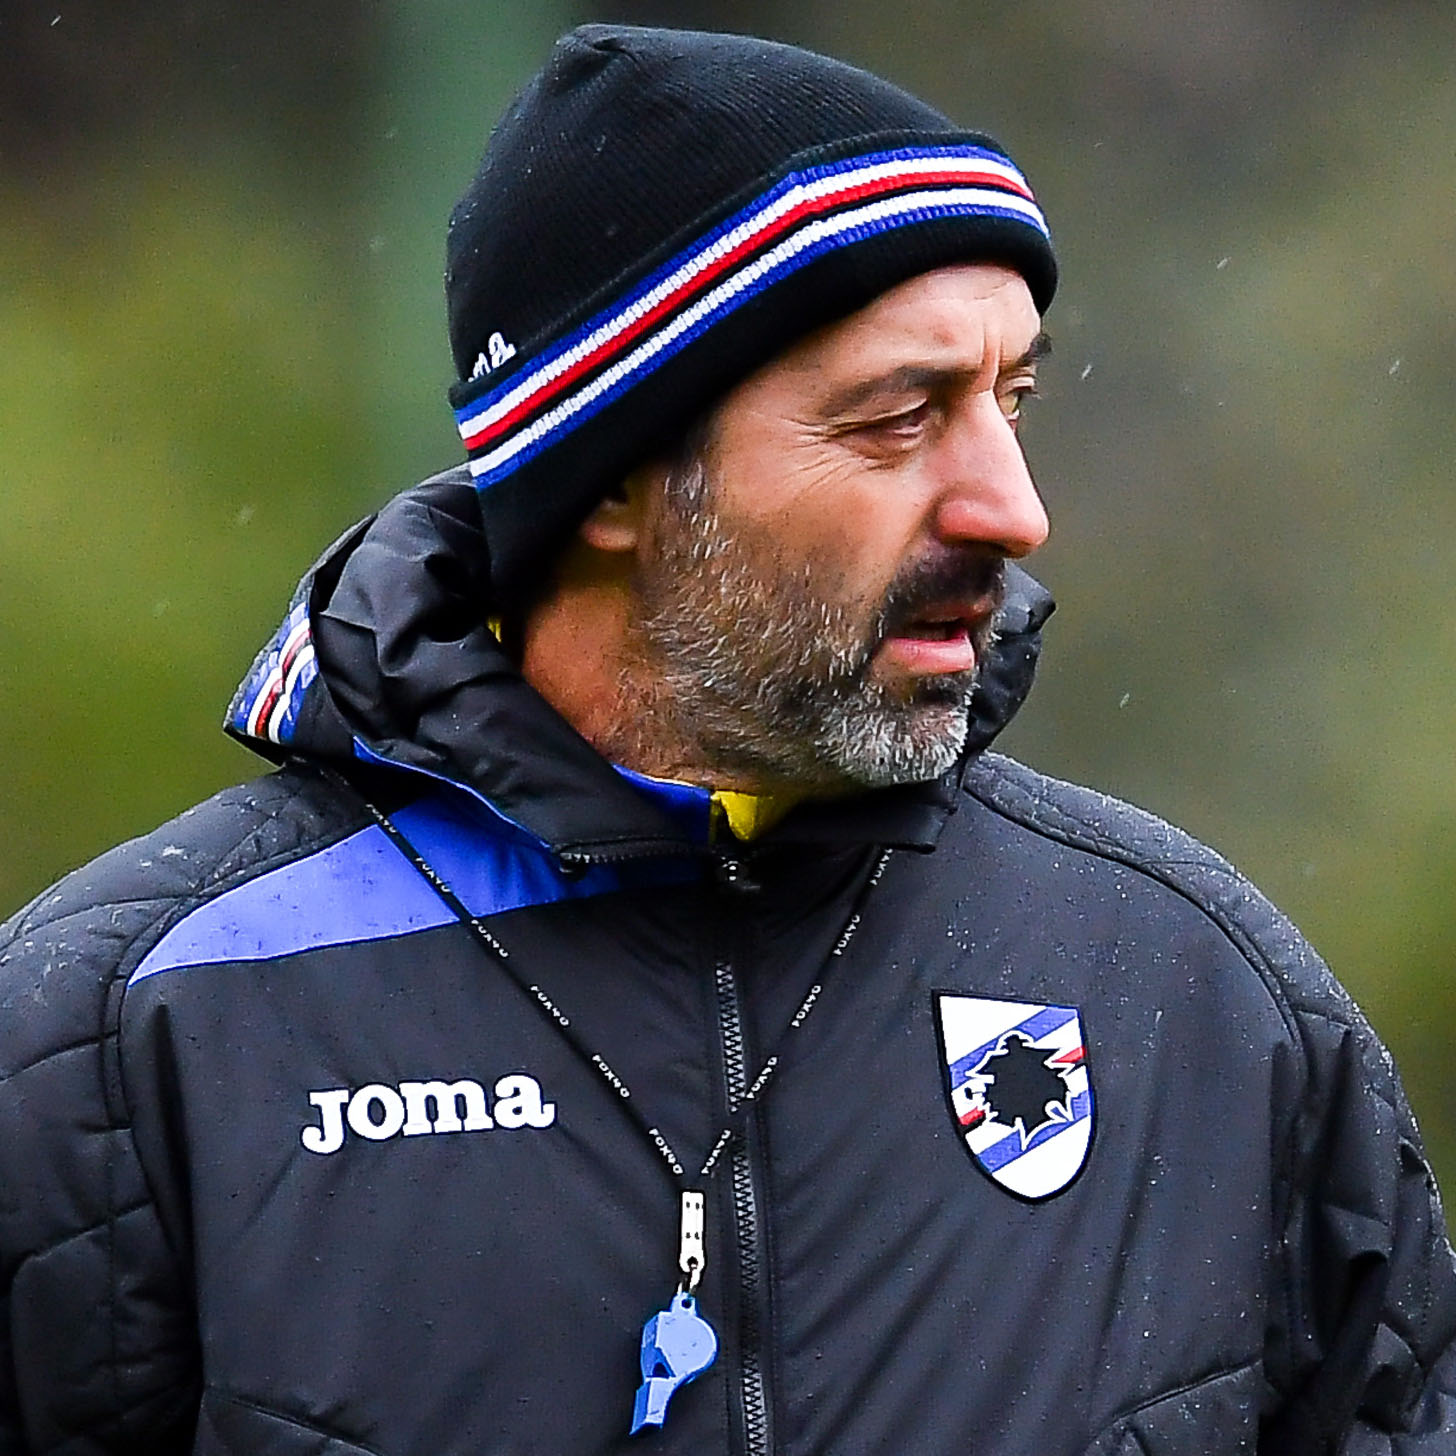 Giampaolo: “The derby is a fresh start. I believe in my team and our football”